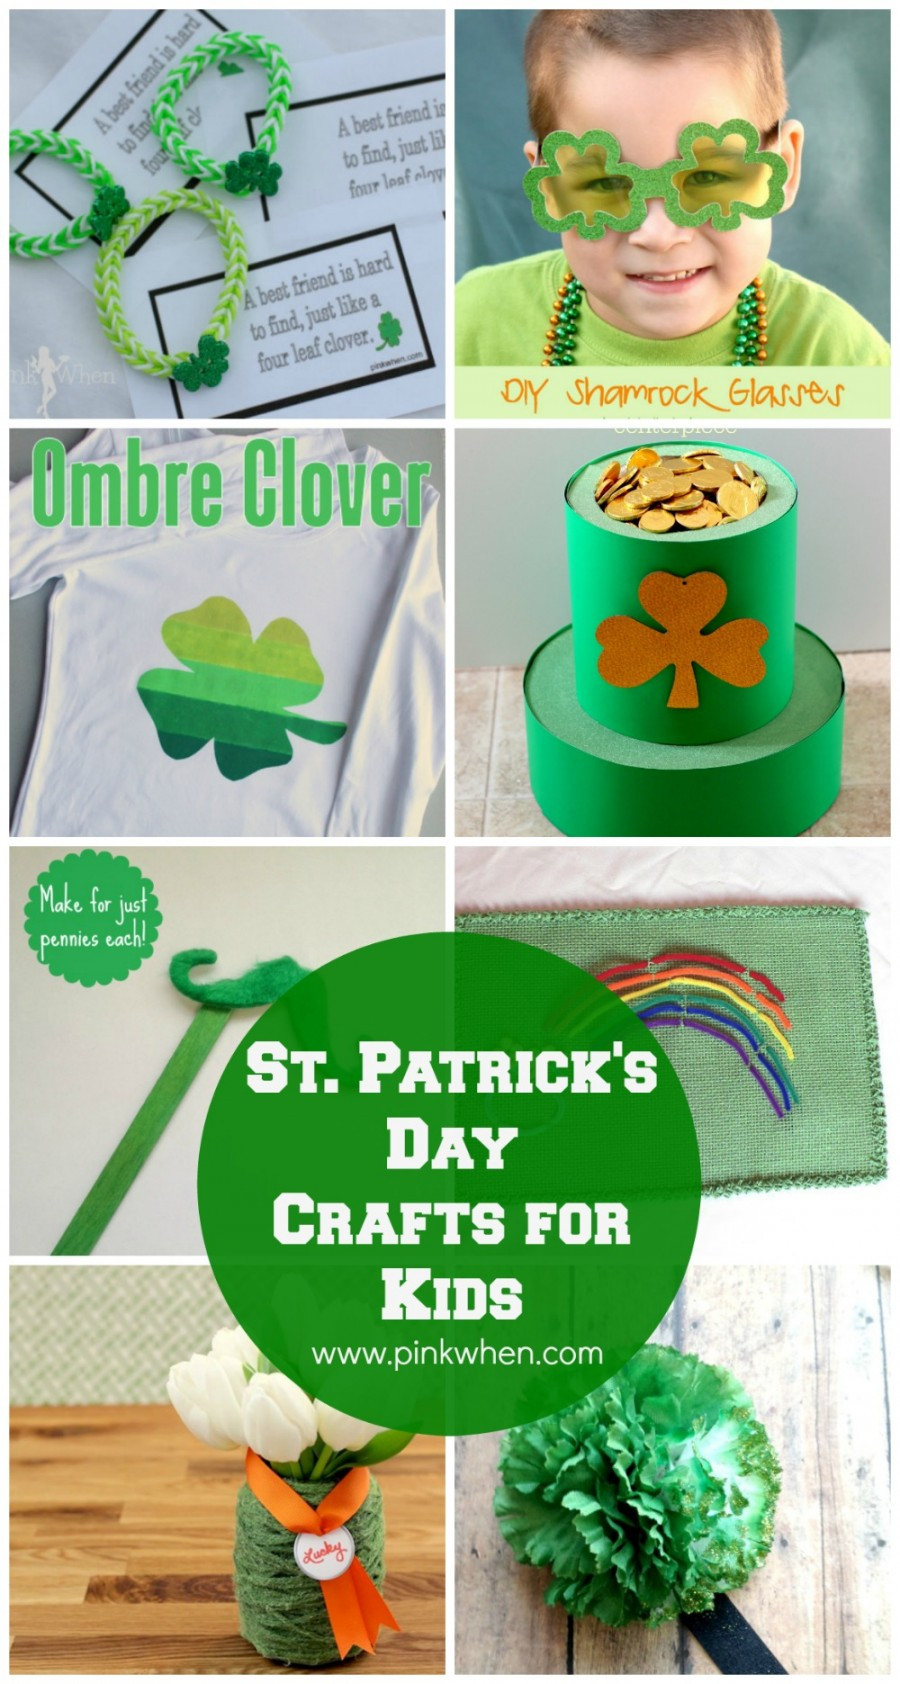 St Patrick's Day Crafts For Kids
 10 St Patrick s Day Crafts for Kids PinkWhen